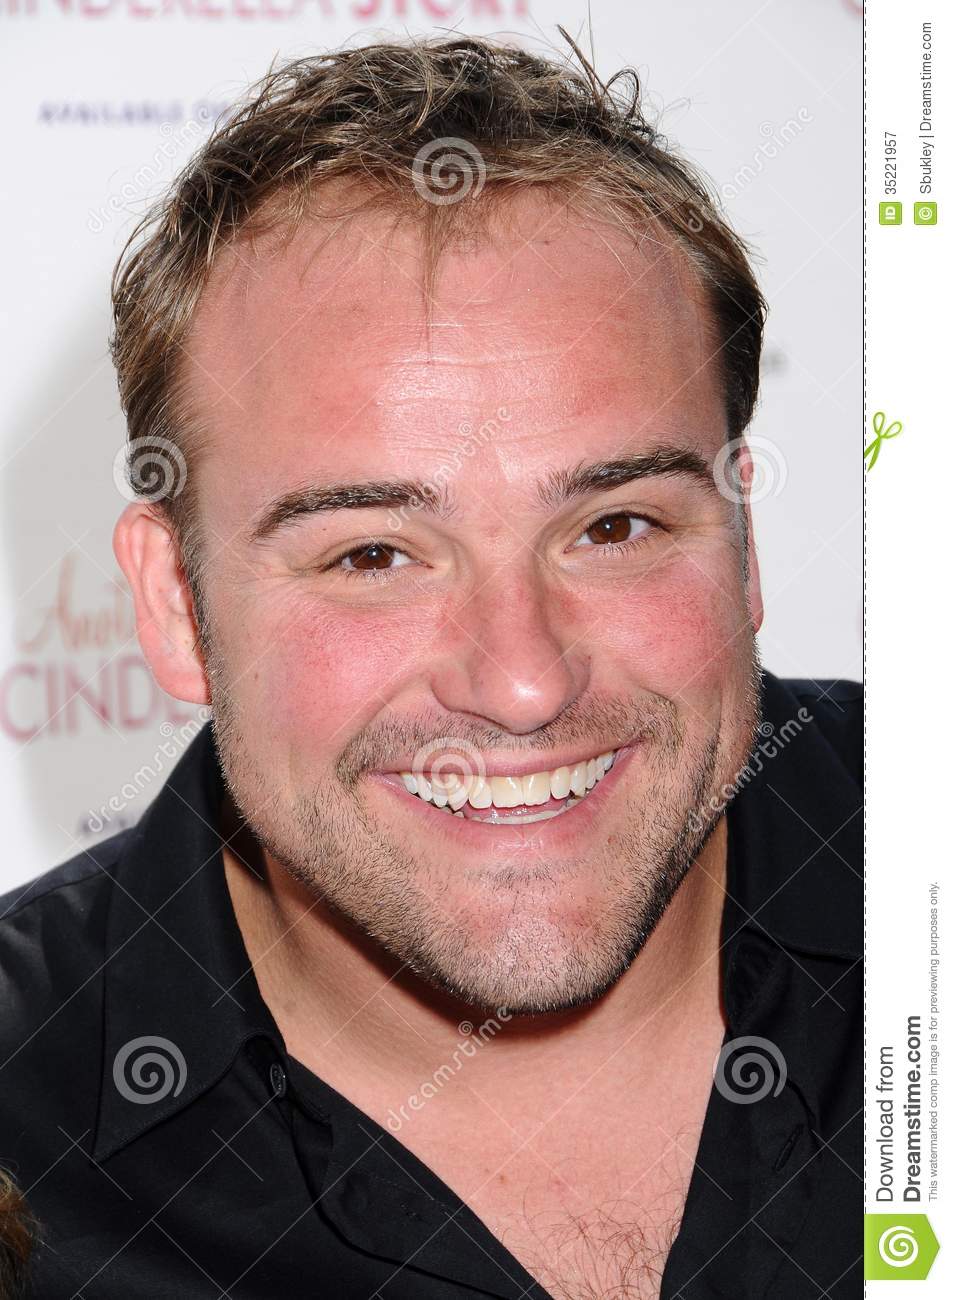 images-of-david-deluise